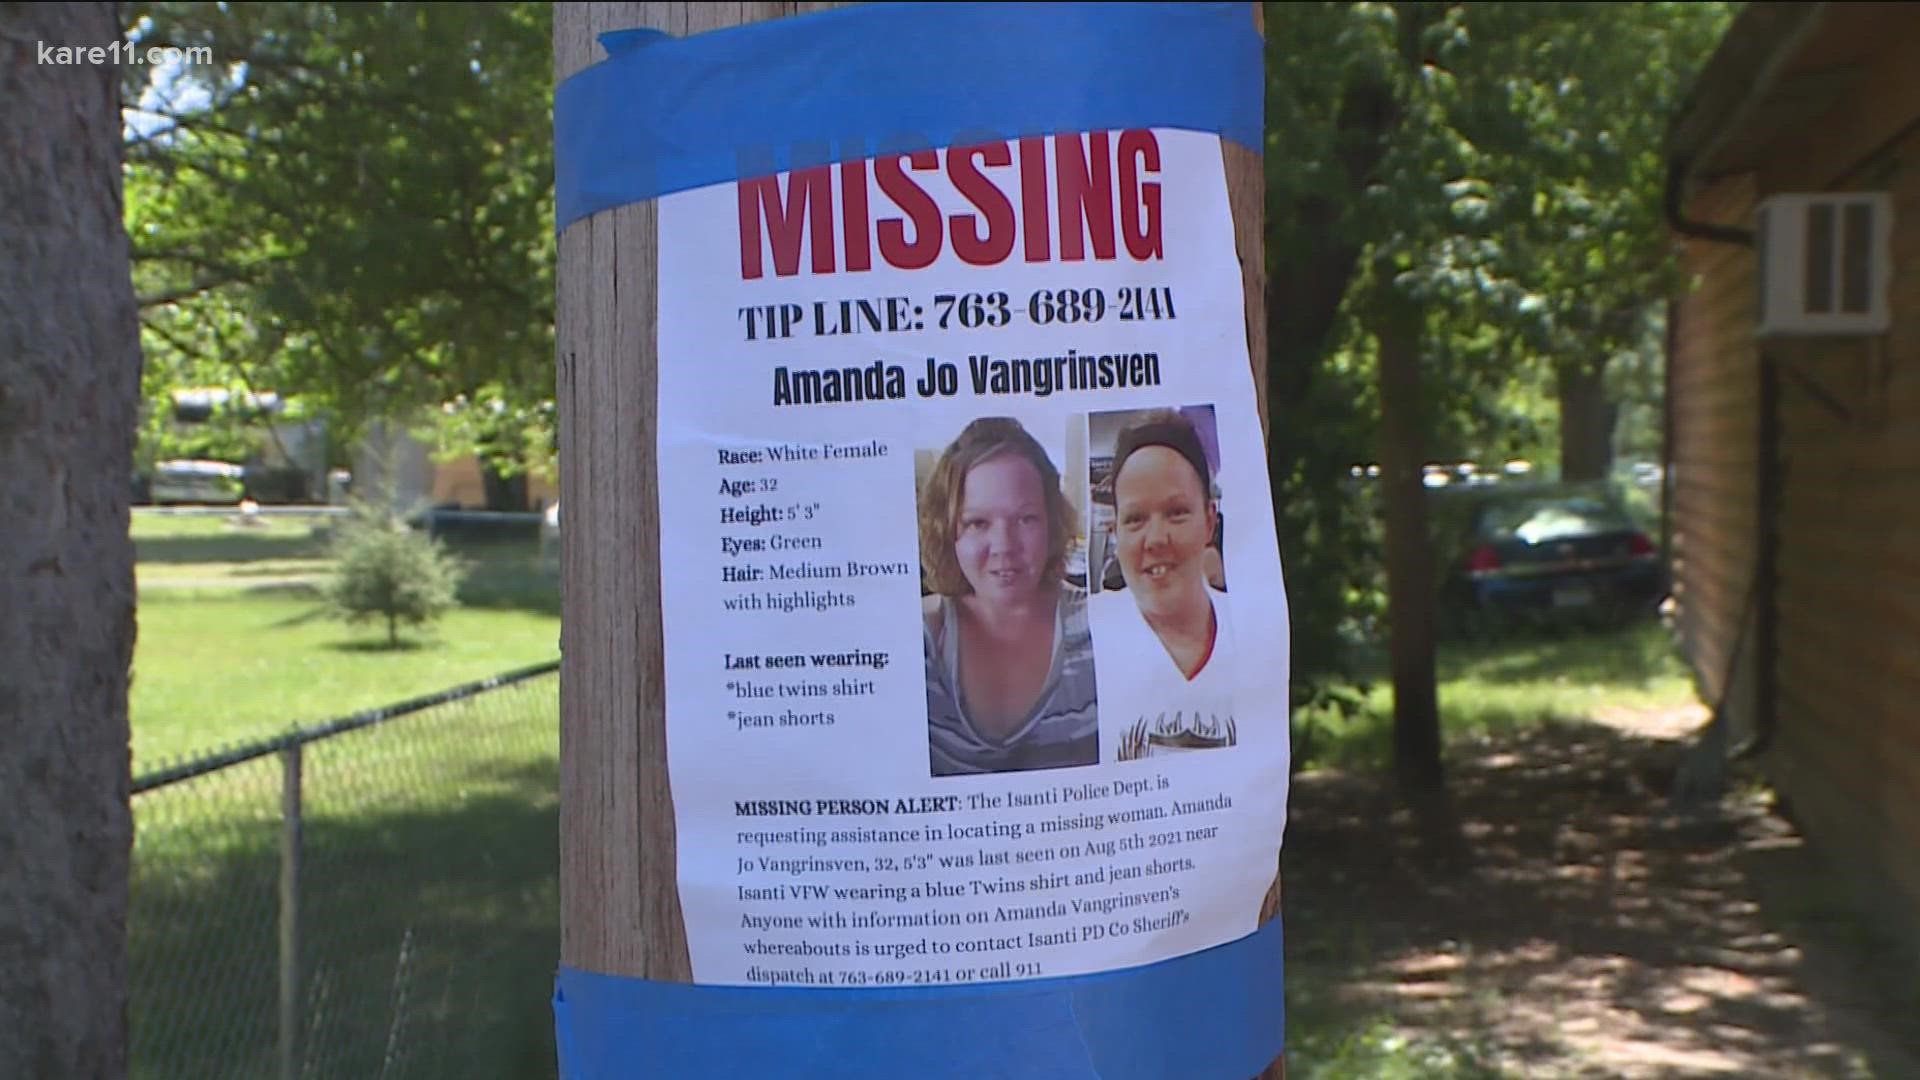 Amanda Jo Vangrinsven, 32, was reported missing on Aug. 7 after she was last seen near the Isanti VFW.